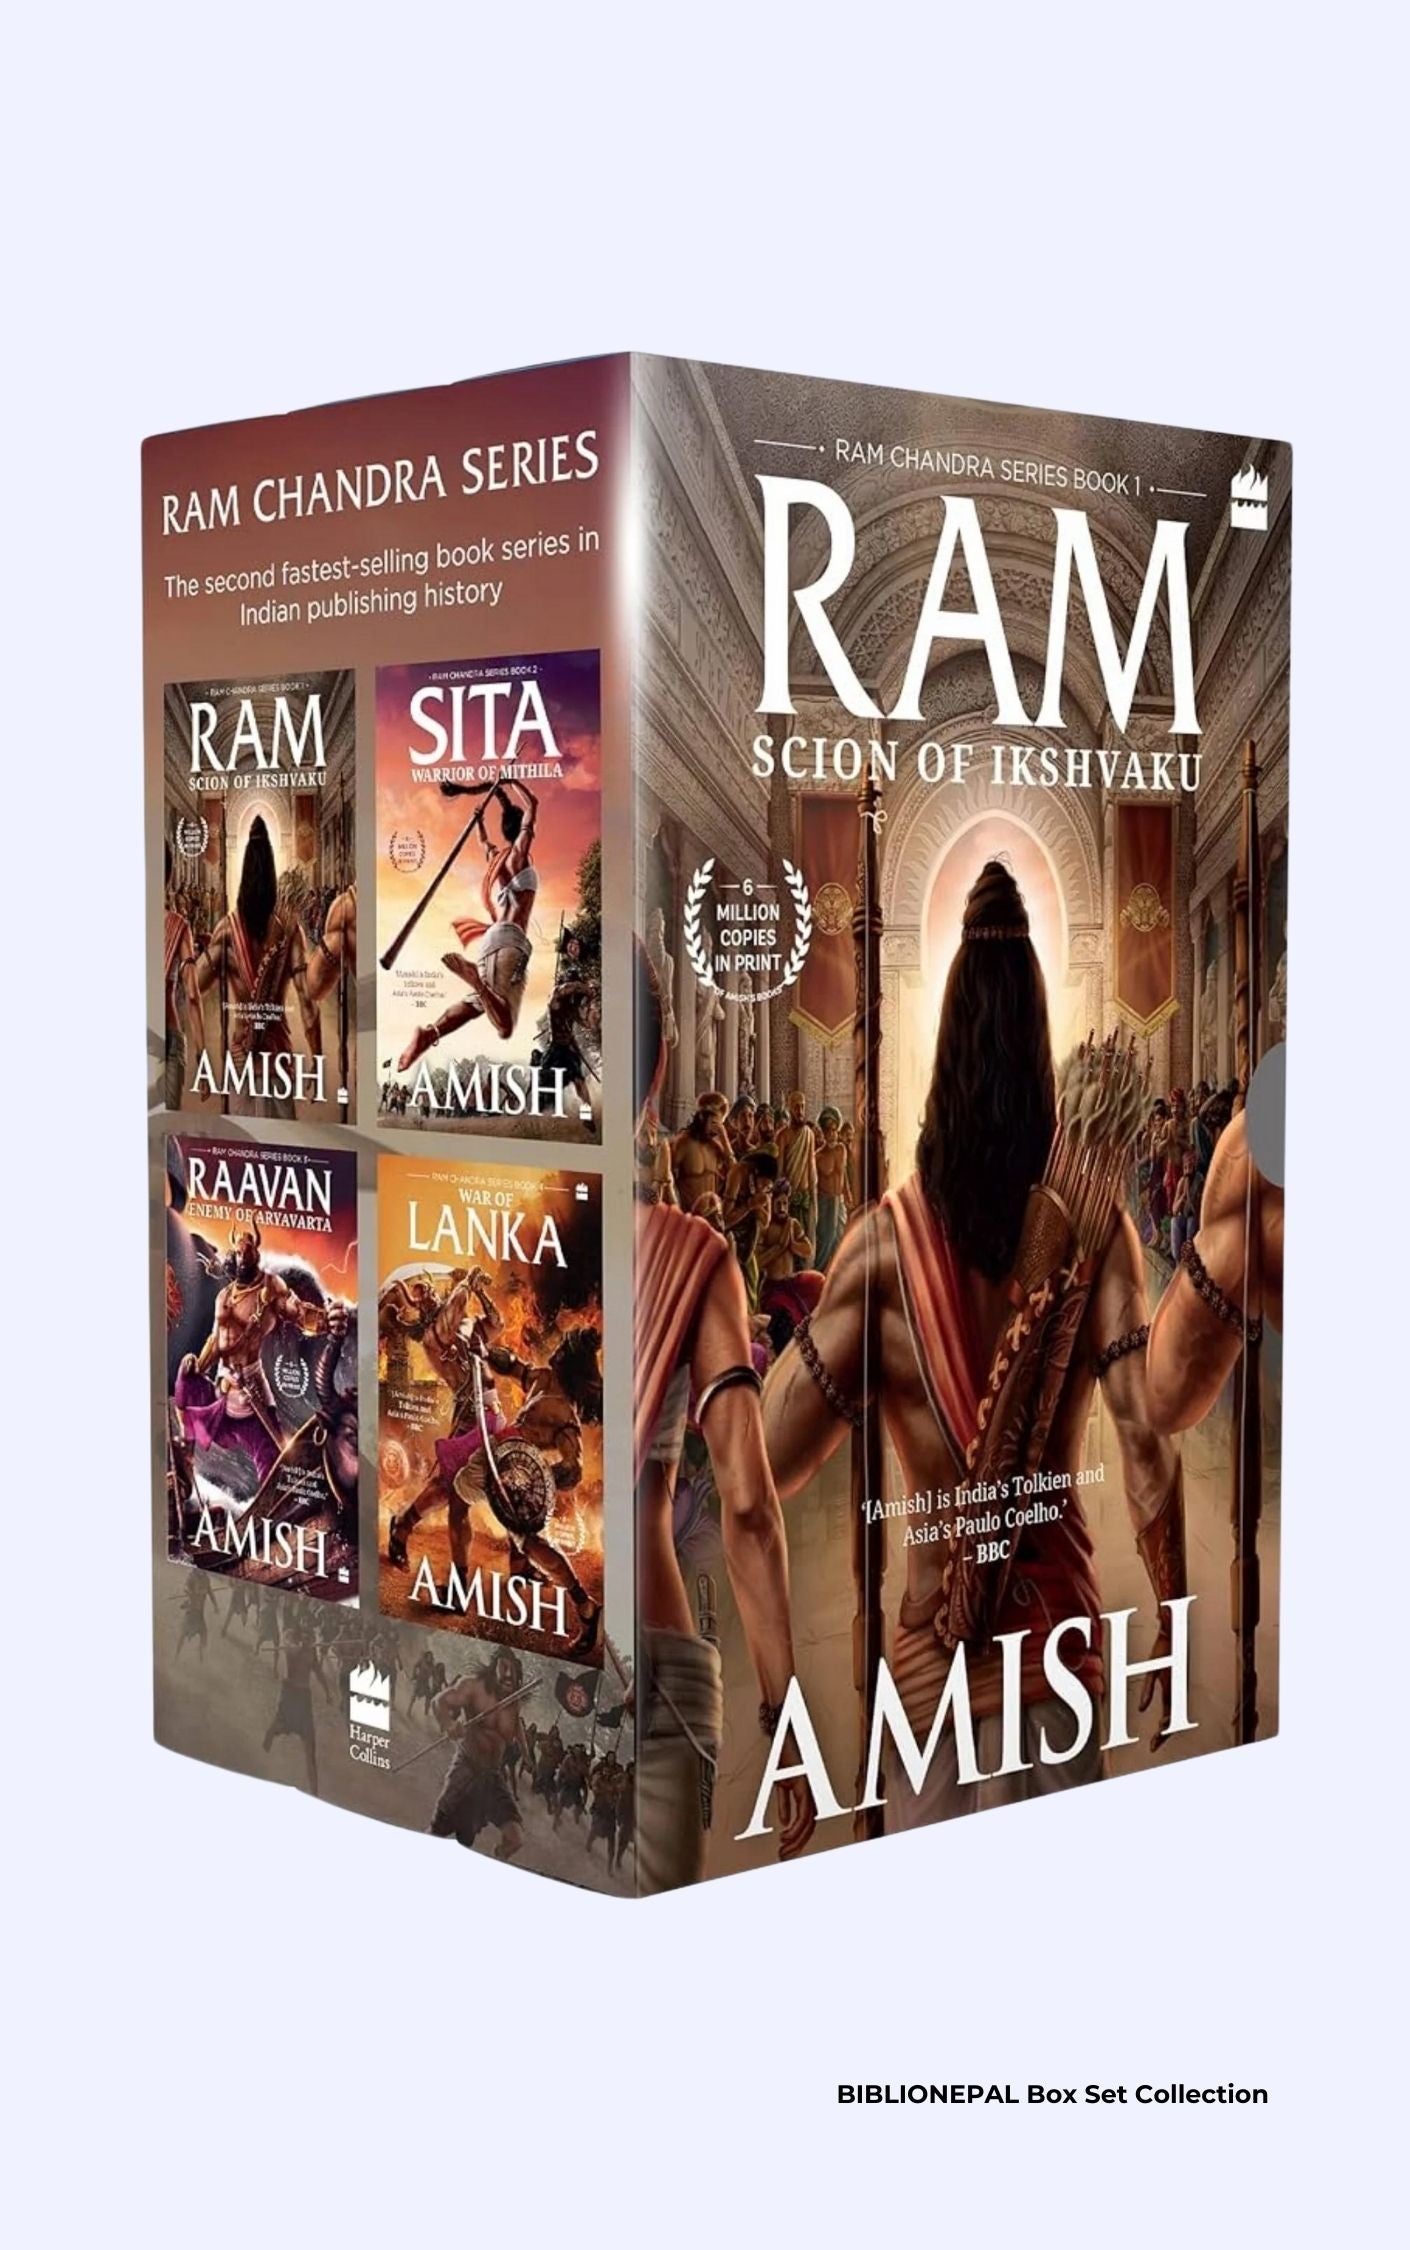 The Ram Chandra Collection